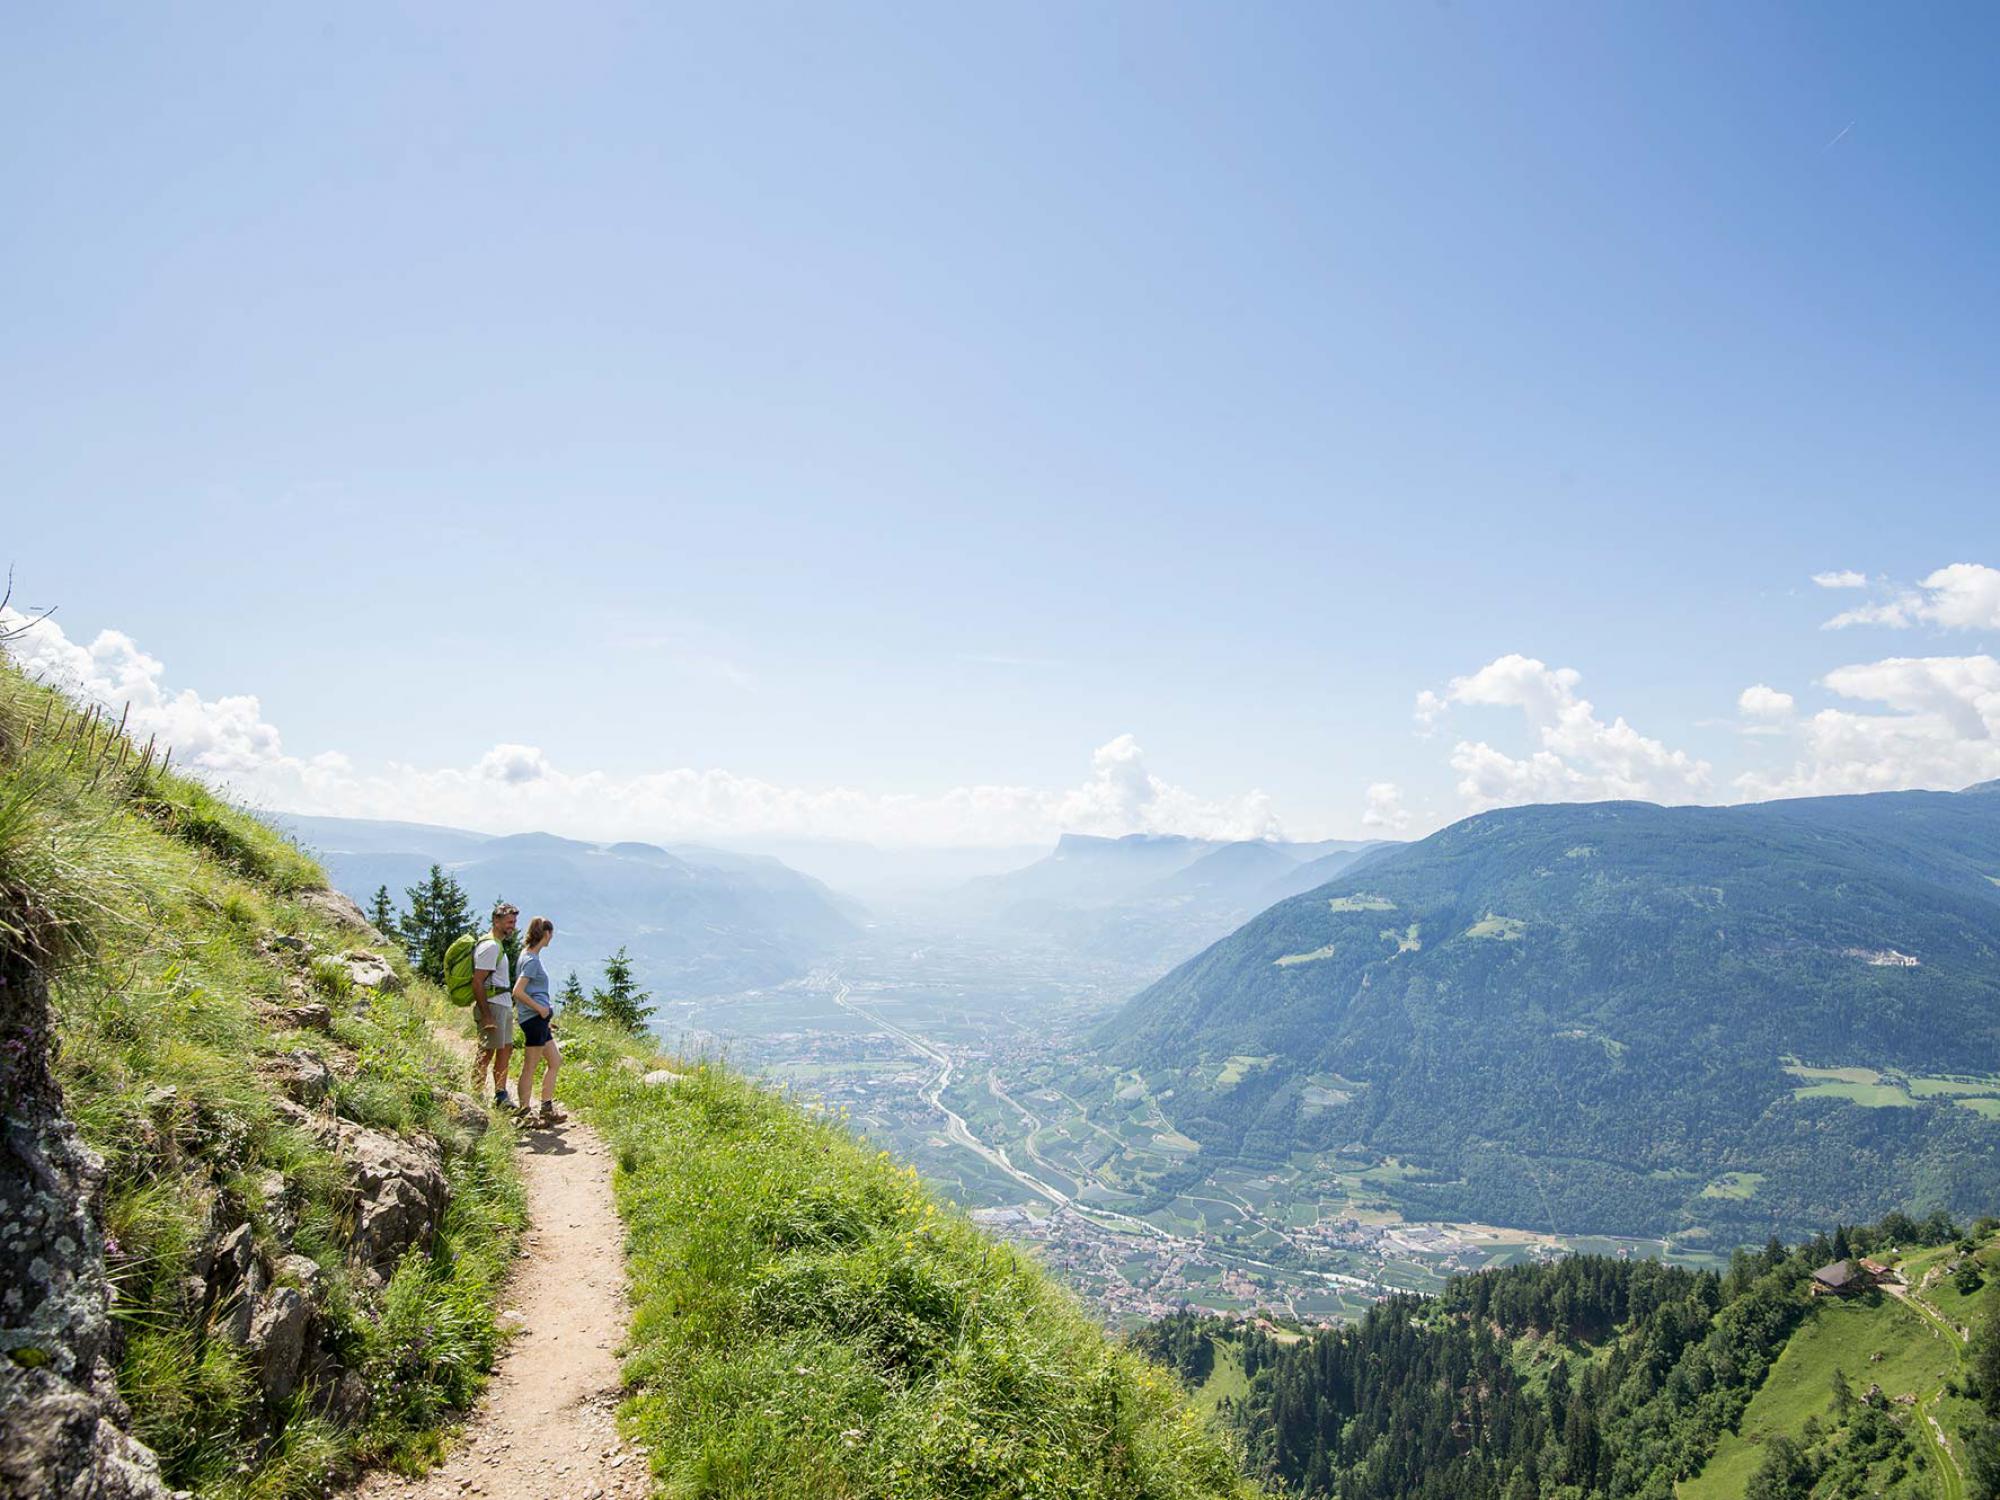 Exciting hikes on the Meraner Höhenweg or Merano High Mountain Trail